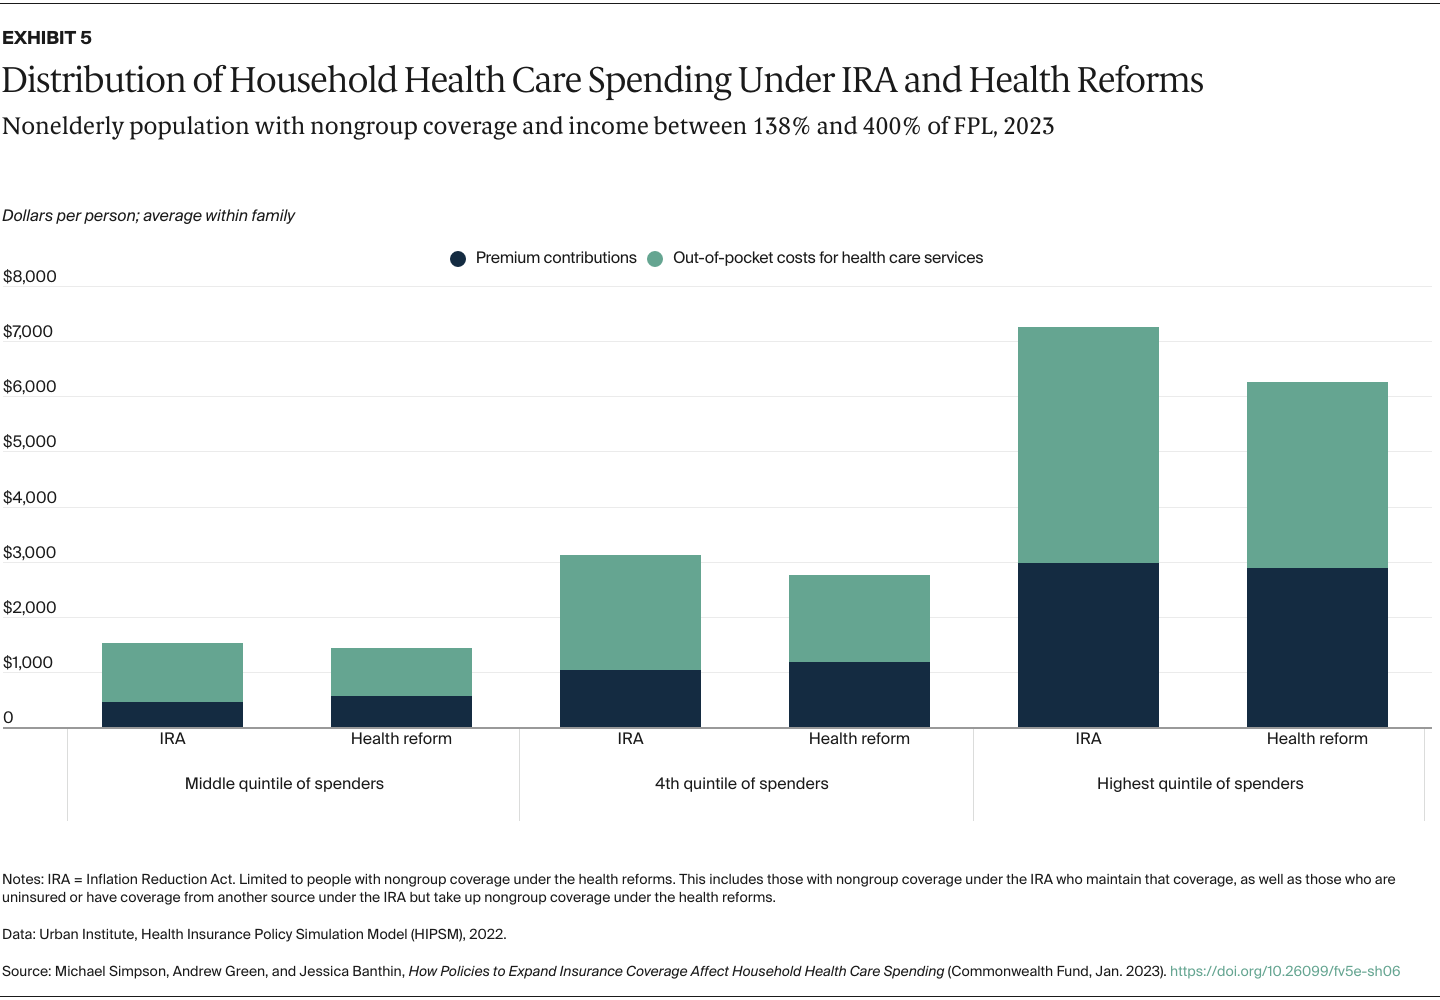 Simpson_policies_expand_coverage_household_spending_Exhibit_05